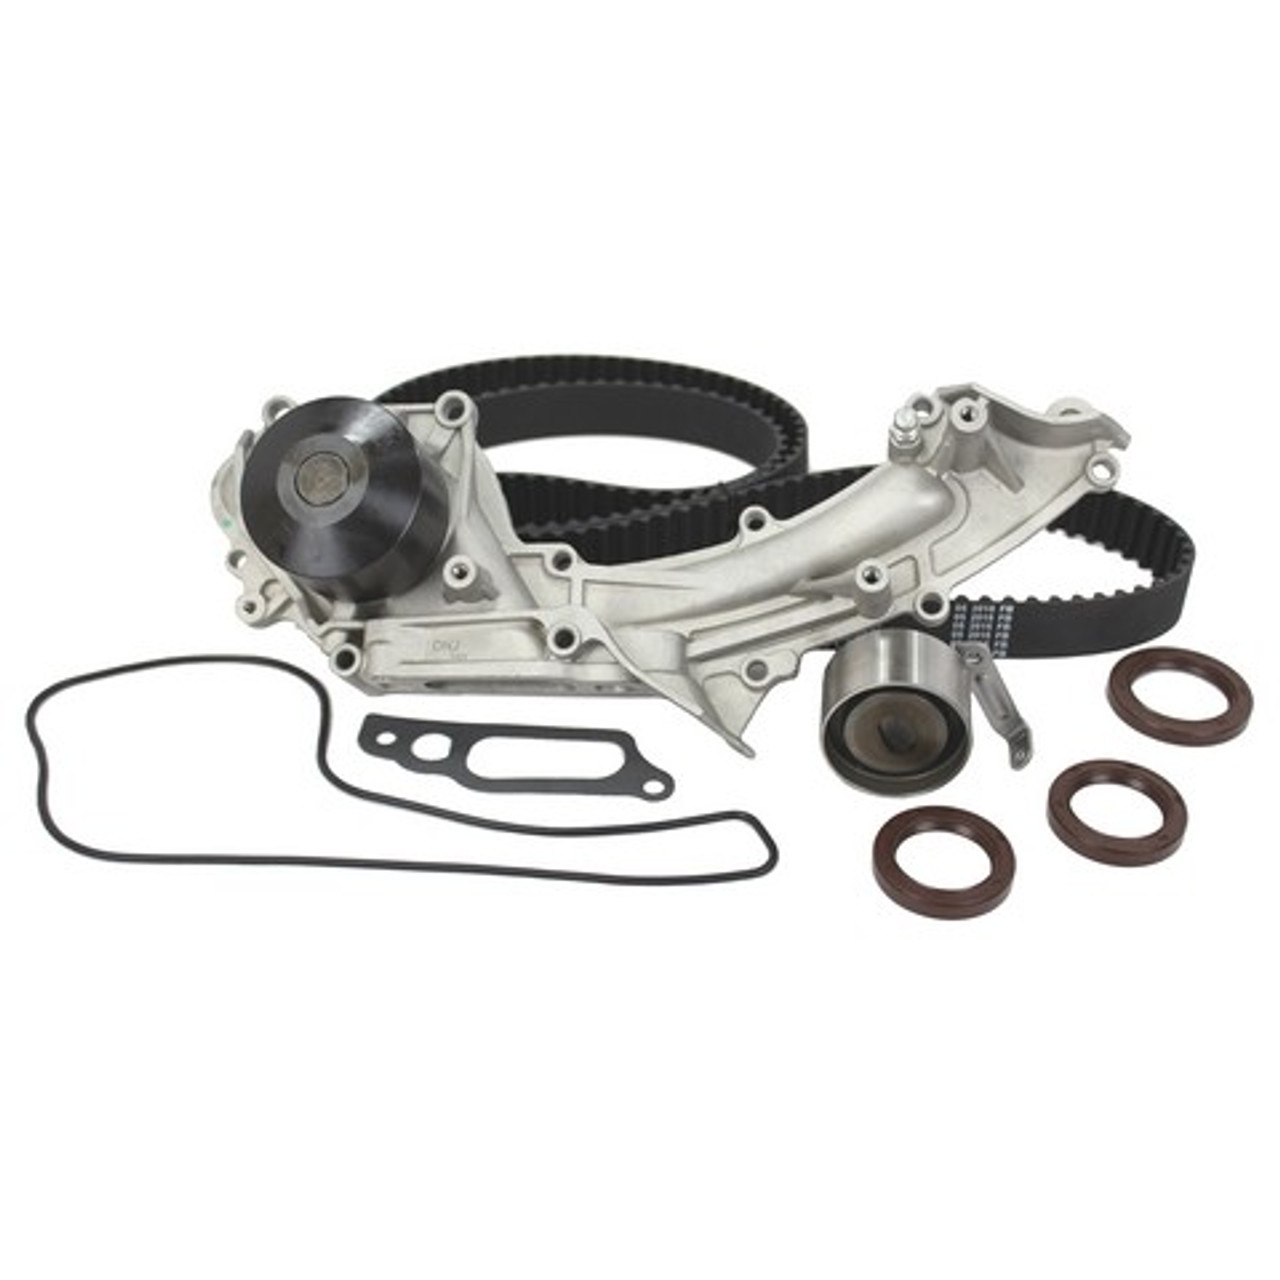 Timing Belt Kit with Water Pump 3.2L 1997 Acura TL - TBK282BWP.2